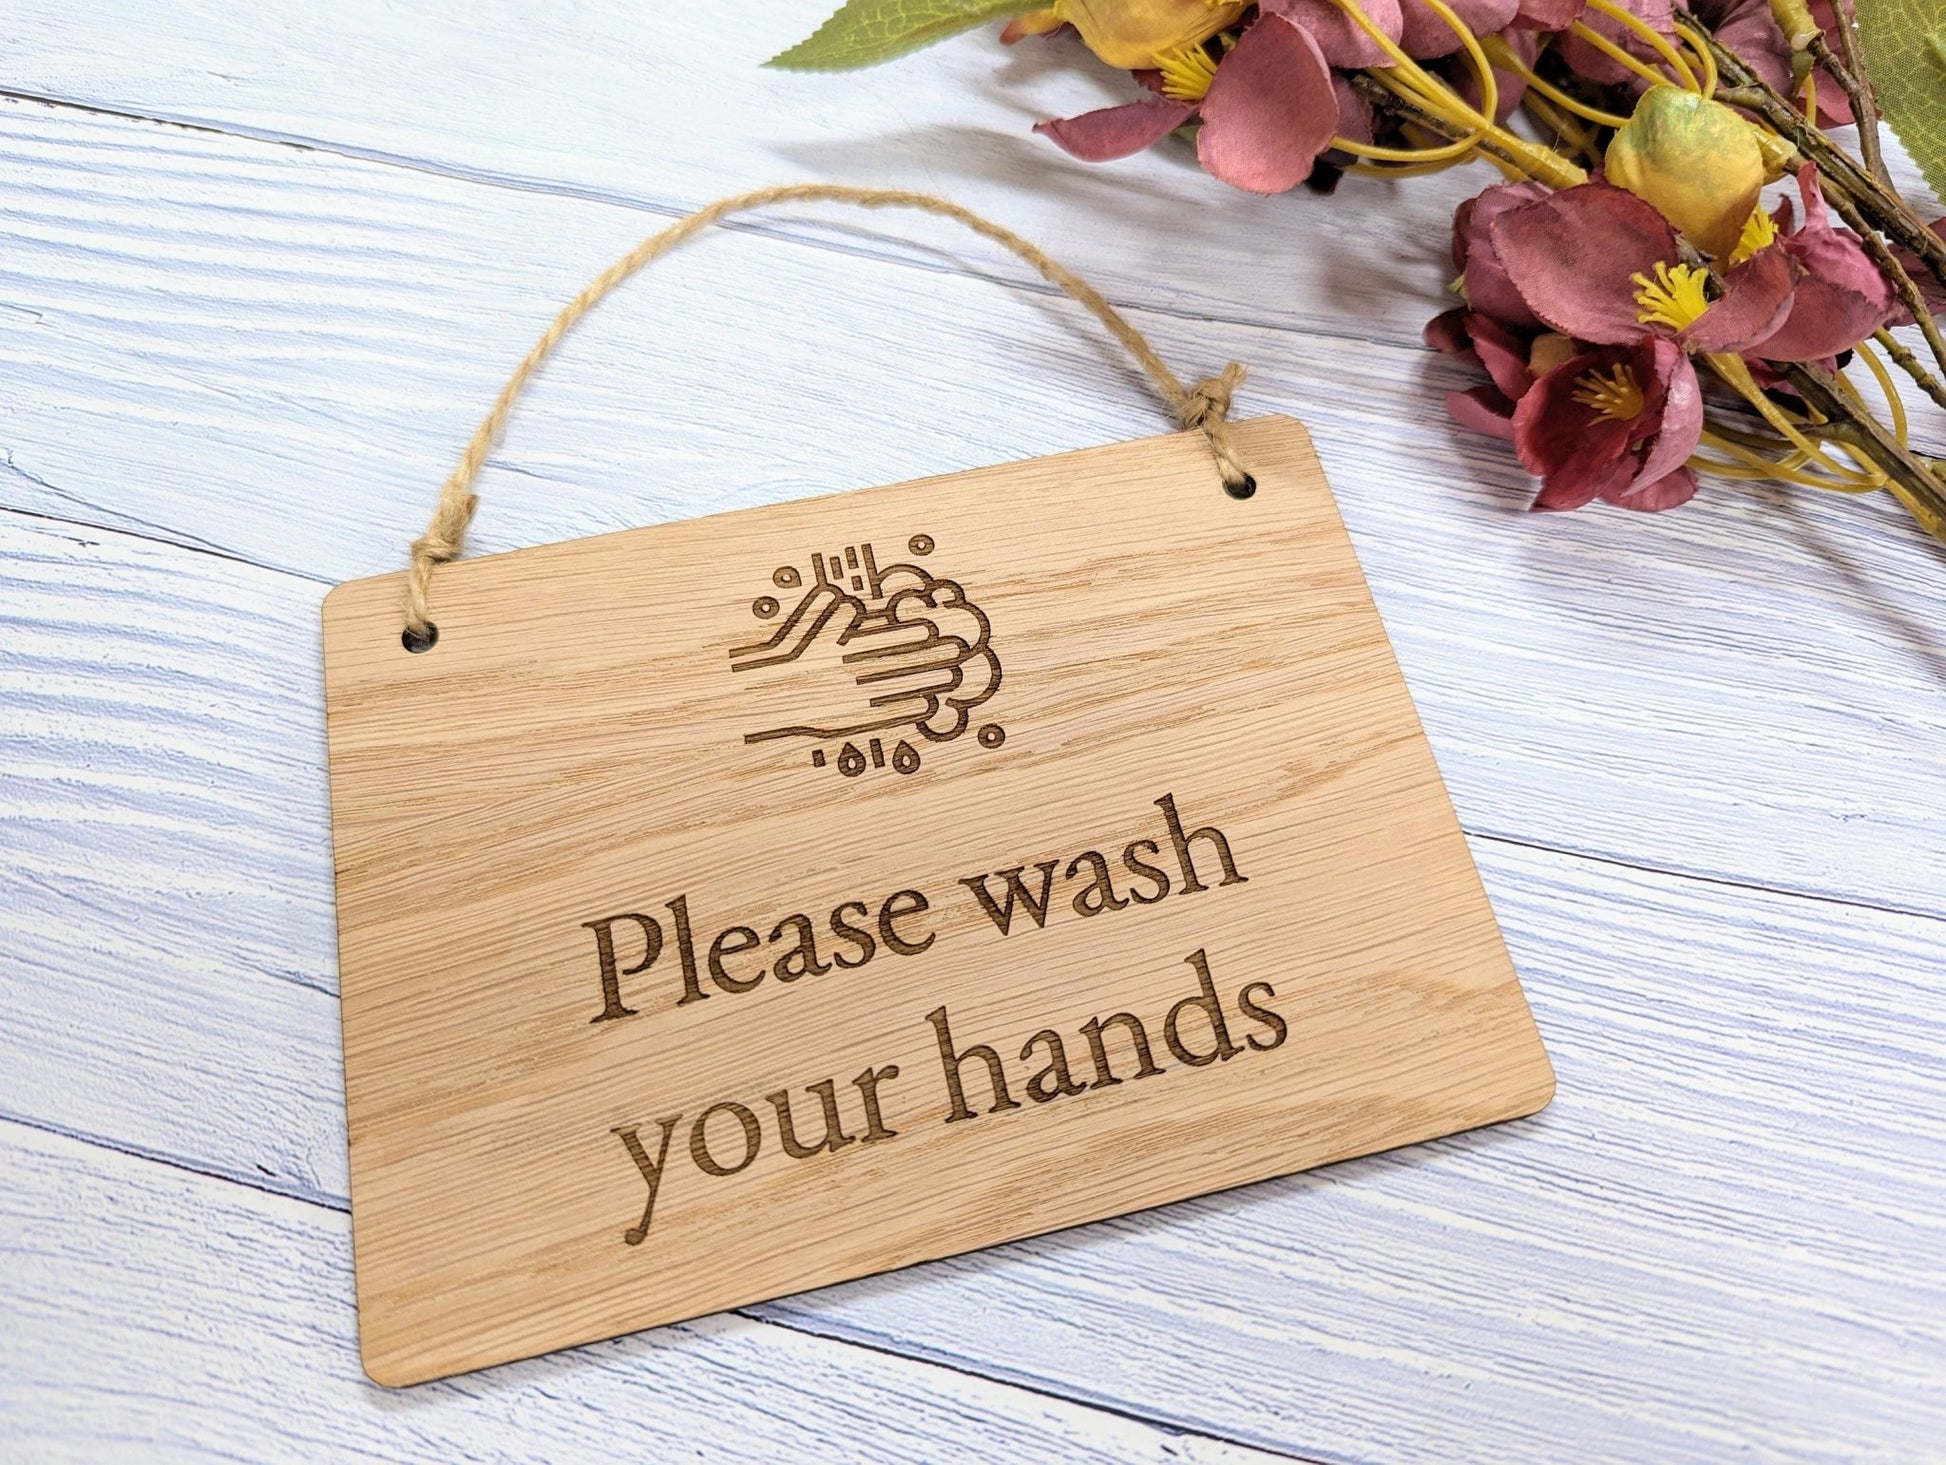 Please Wash Your Hands" Wooden Sign - Oak Veneered MDF - Ideal for Homes, Offices, Restaurants - Hygiene Reminder - Easy to Install - CherryGroveCraft